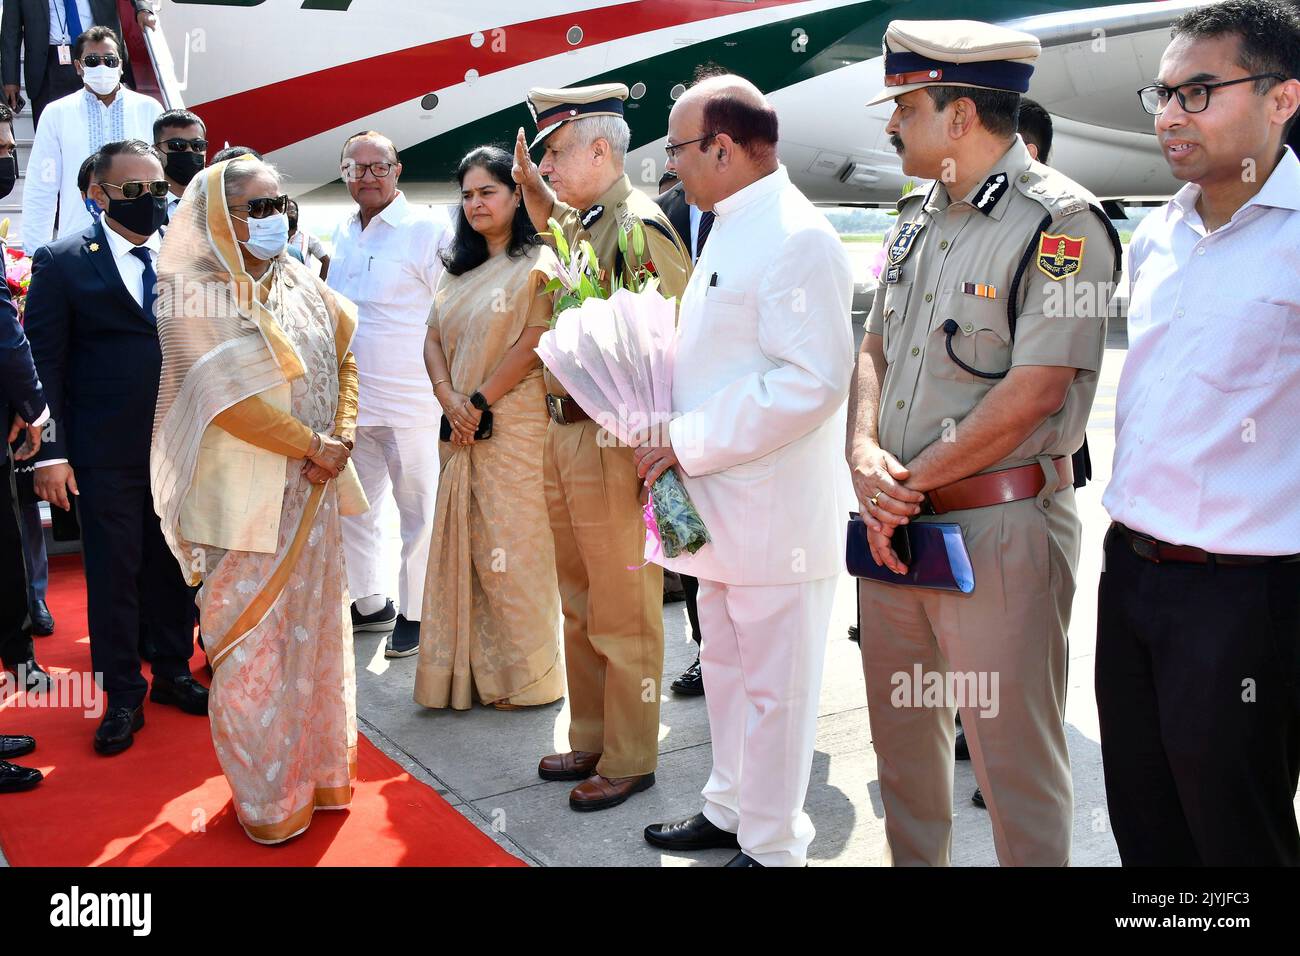 Jaipur, India, September 8, 2022: Bangladesh Prime Minister Sheikh Hasina being welcomed by government officials at Jaipur International Airport in Rajasthan. Credit: Sumit Saraswat/Alamy Live News Stock Photo